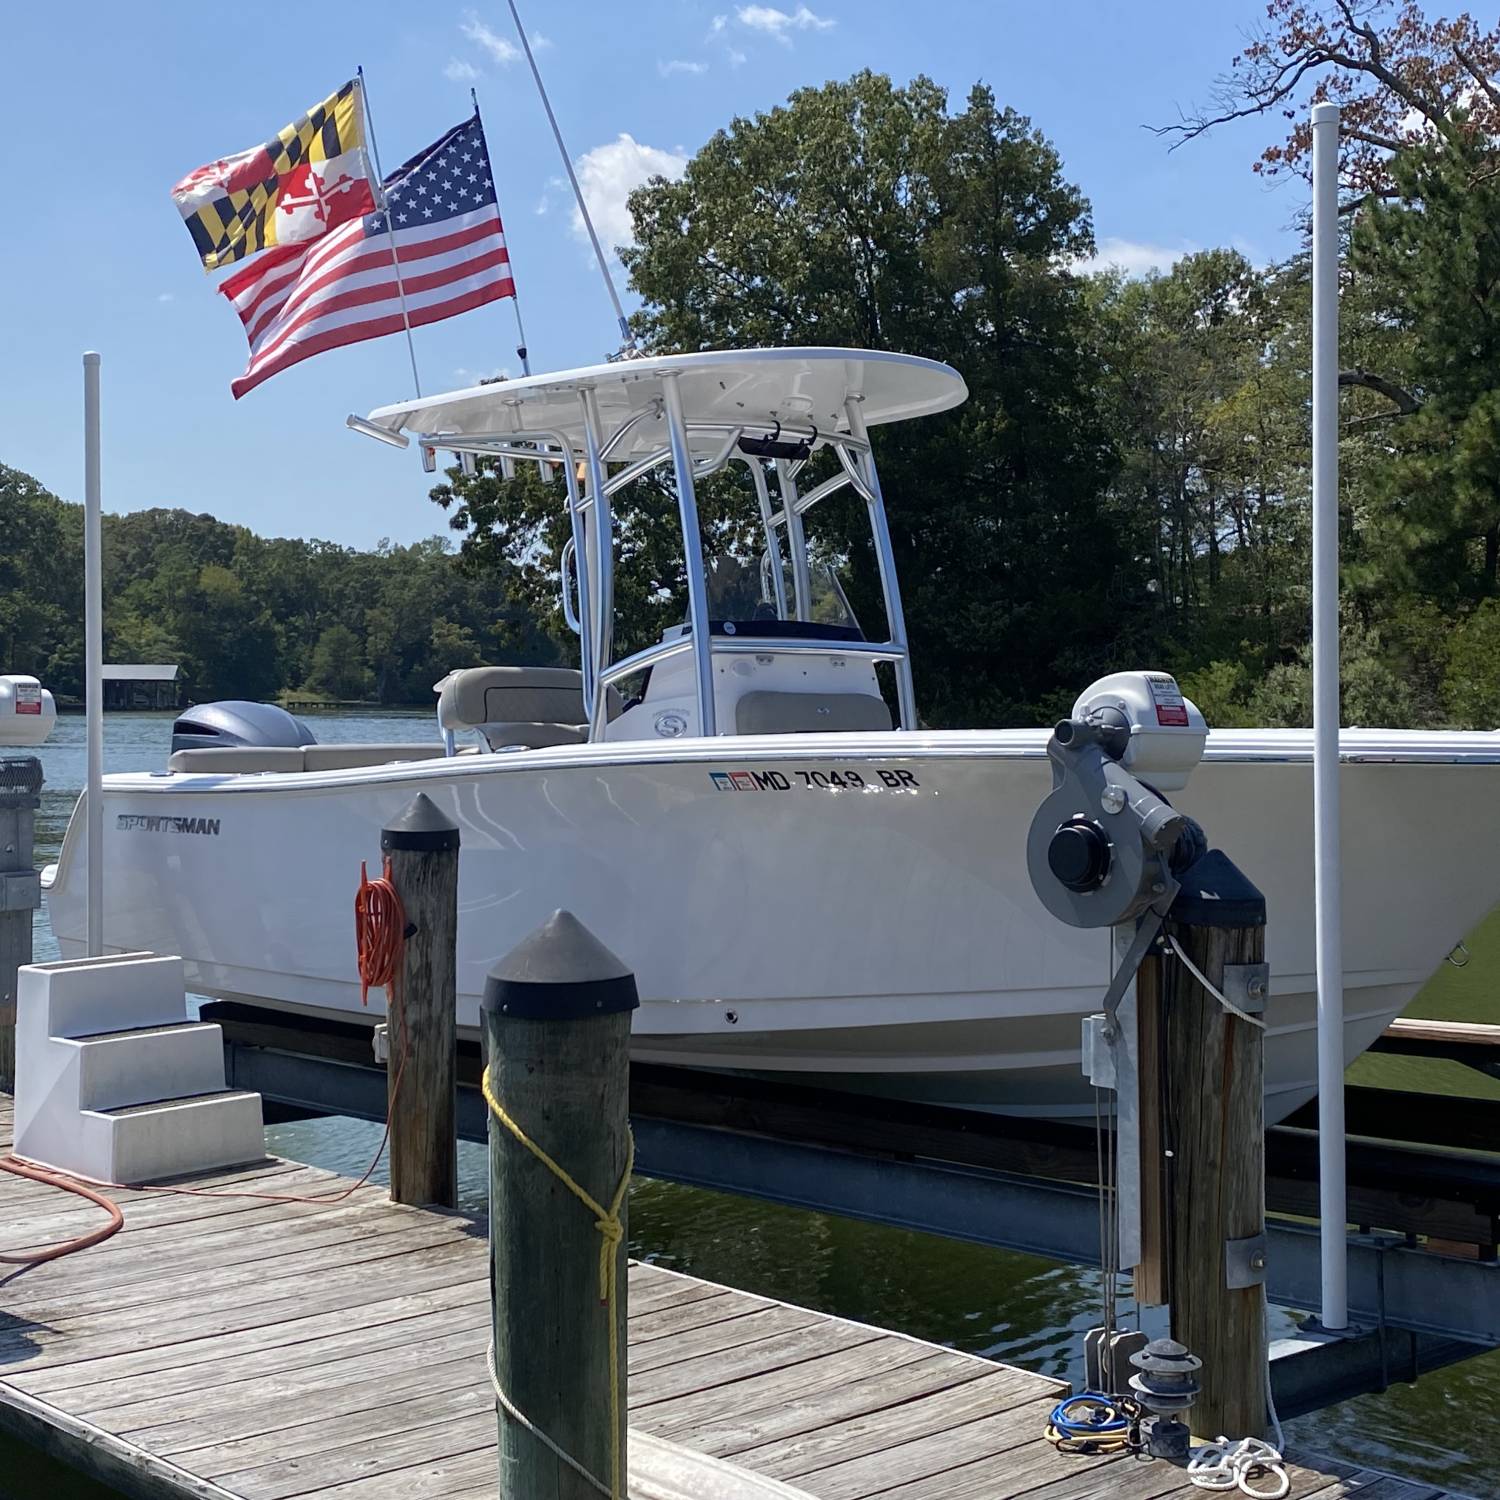 Title: Mine - On board their Sportsman Heritage 231 Center Console - Location: Solomon Island MD. Participating in the Photo Contest #SportsmanNovember2023